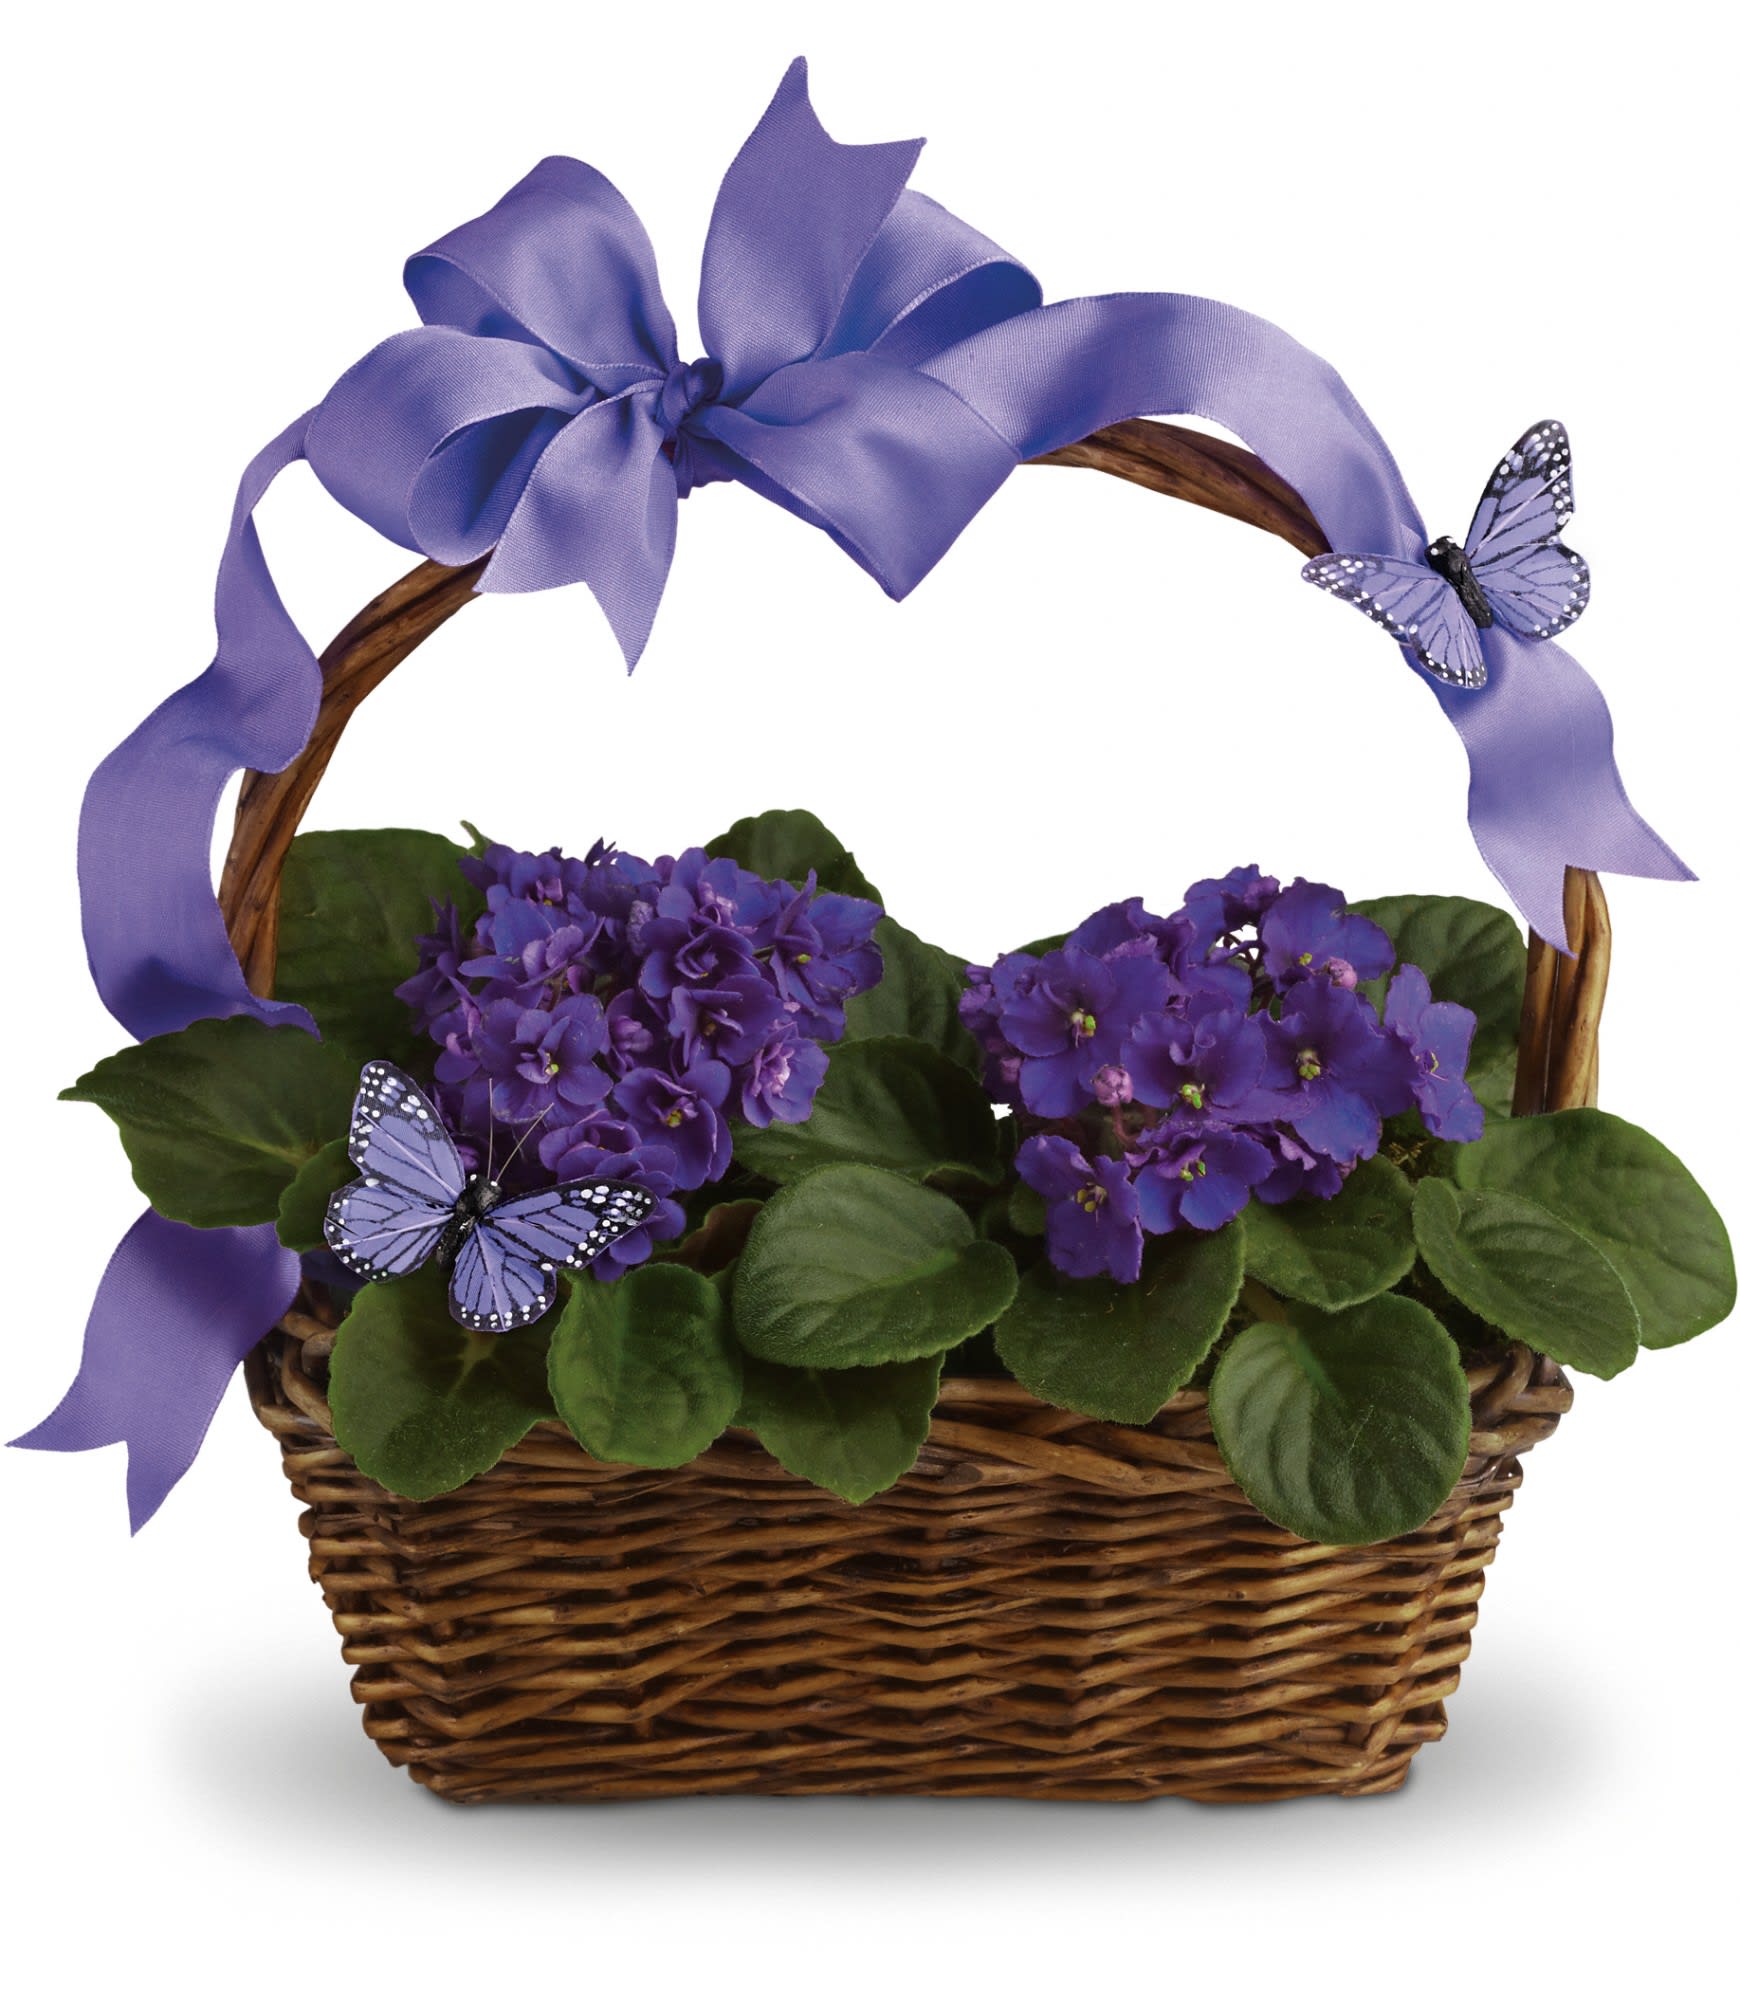 Violets and Butterflies in a basket (basket design will vary) Flower Bouquet